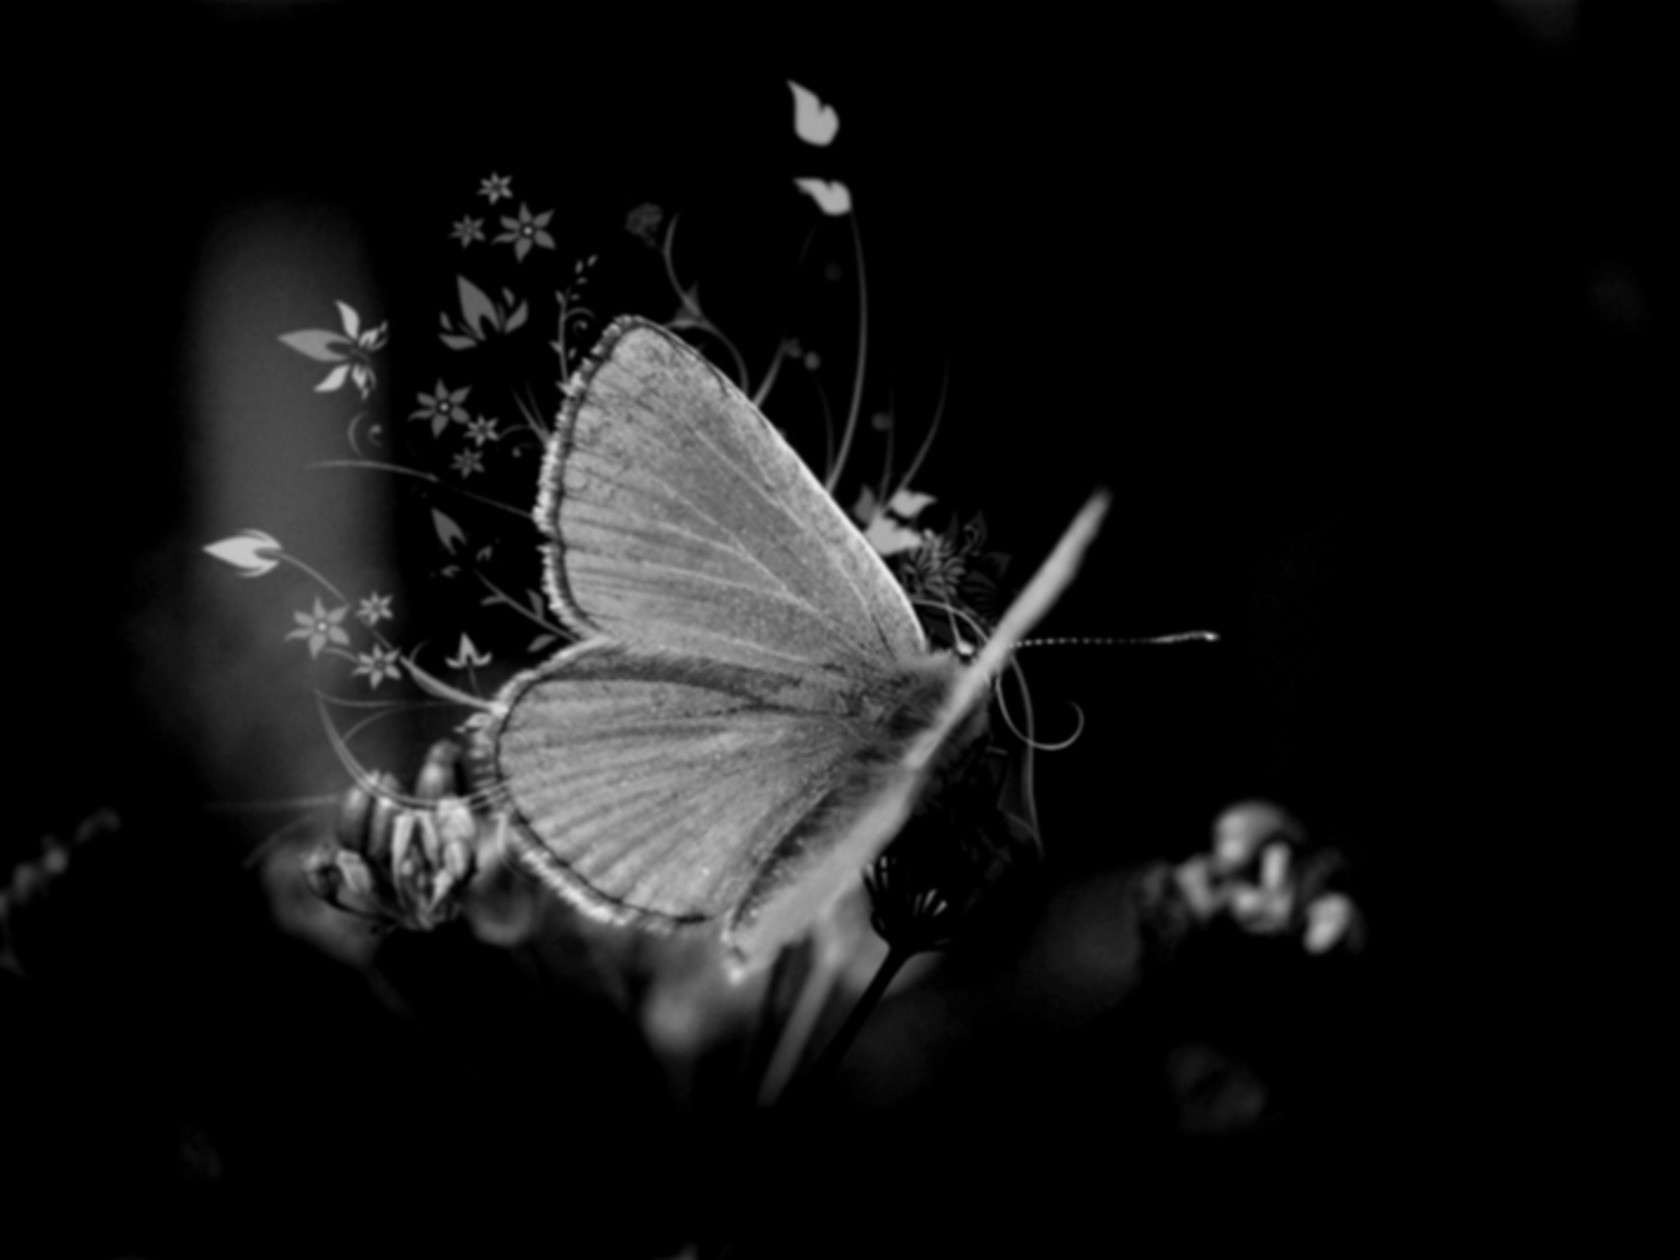 HD wallpaper Black and white photo of a butterfly on a flower taiwan  kaohsiung  Wallpaper Flare